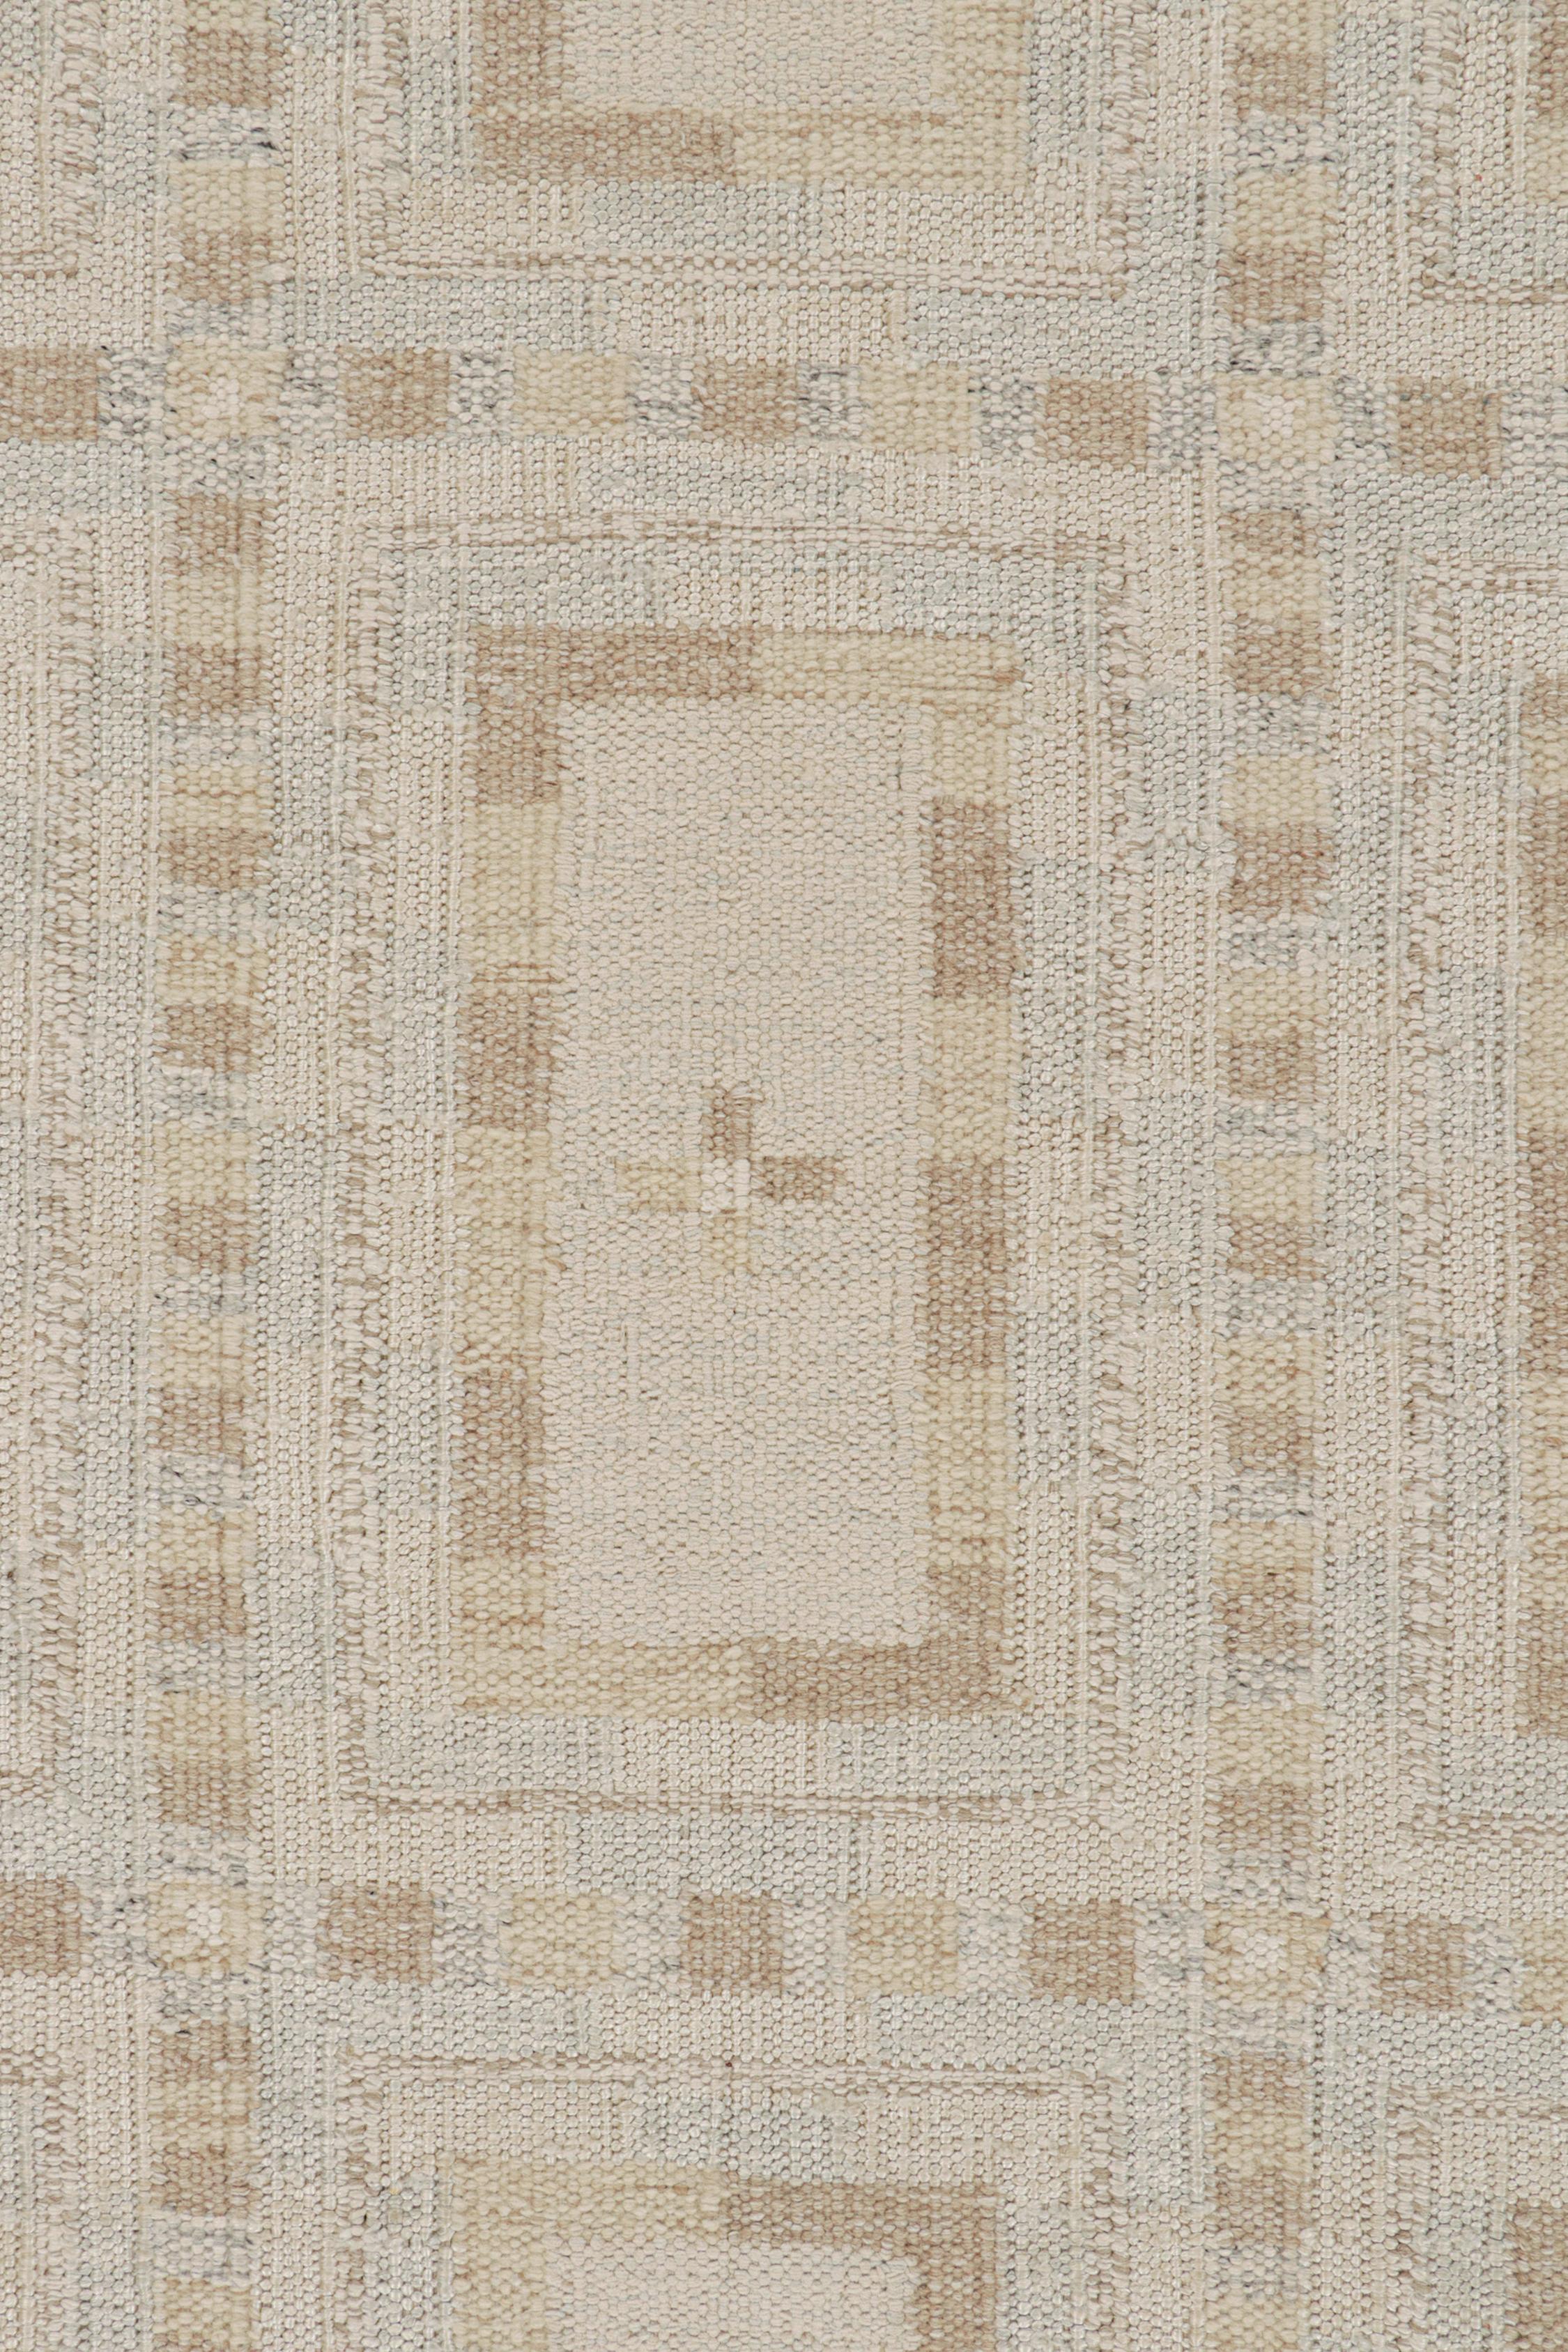 Hand-Knotted Rug & Kilim’s Scandinavian Style Kilim in White with Beige Geometric Patterns For Sale